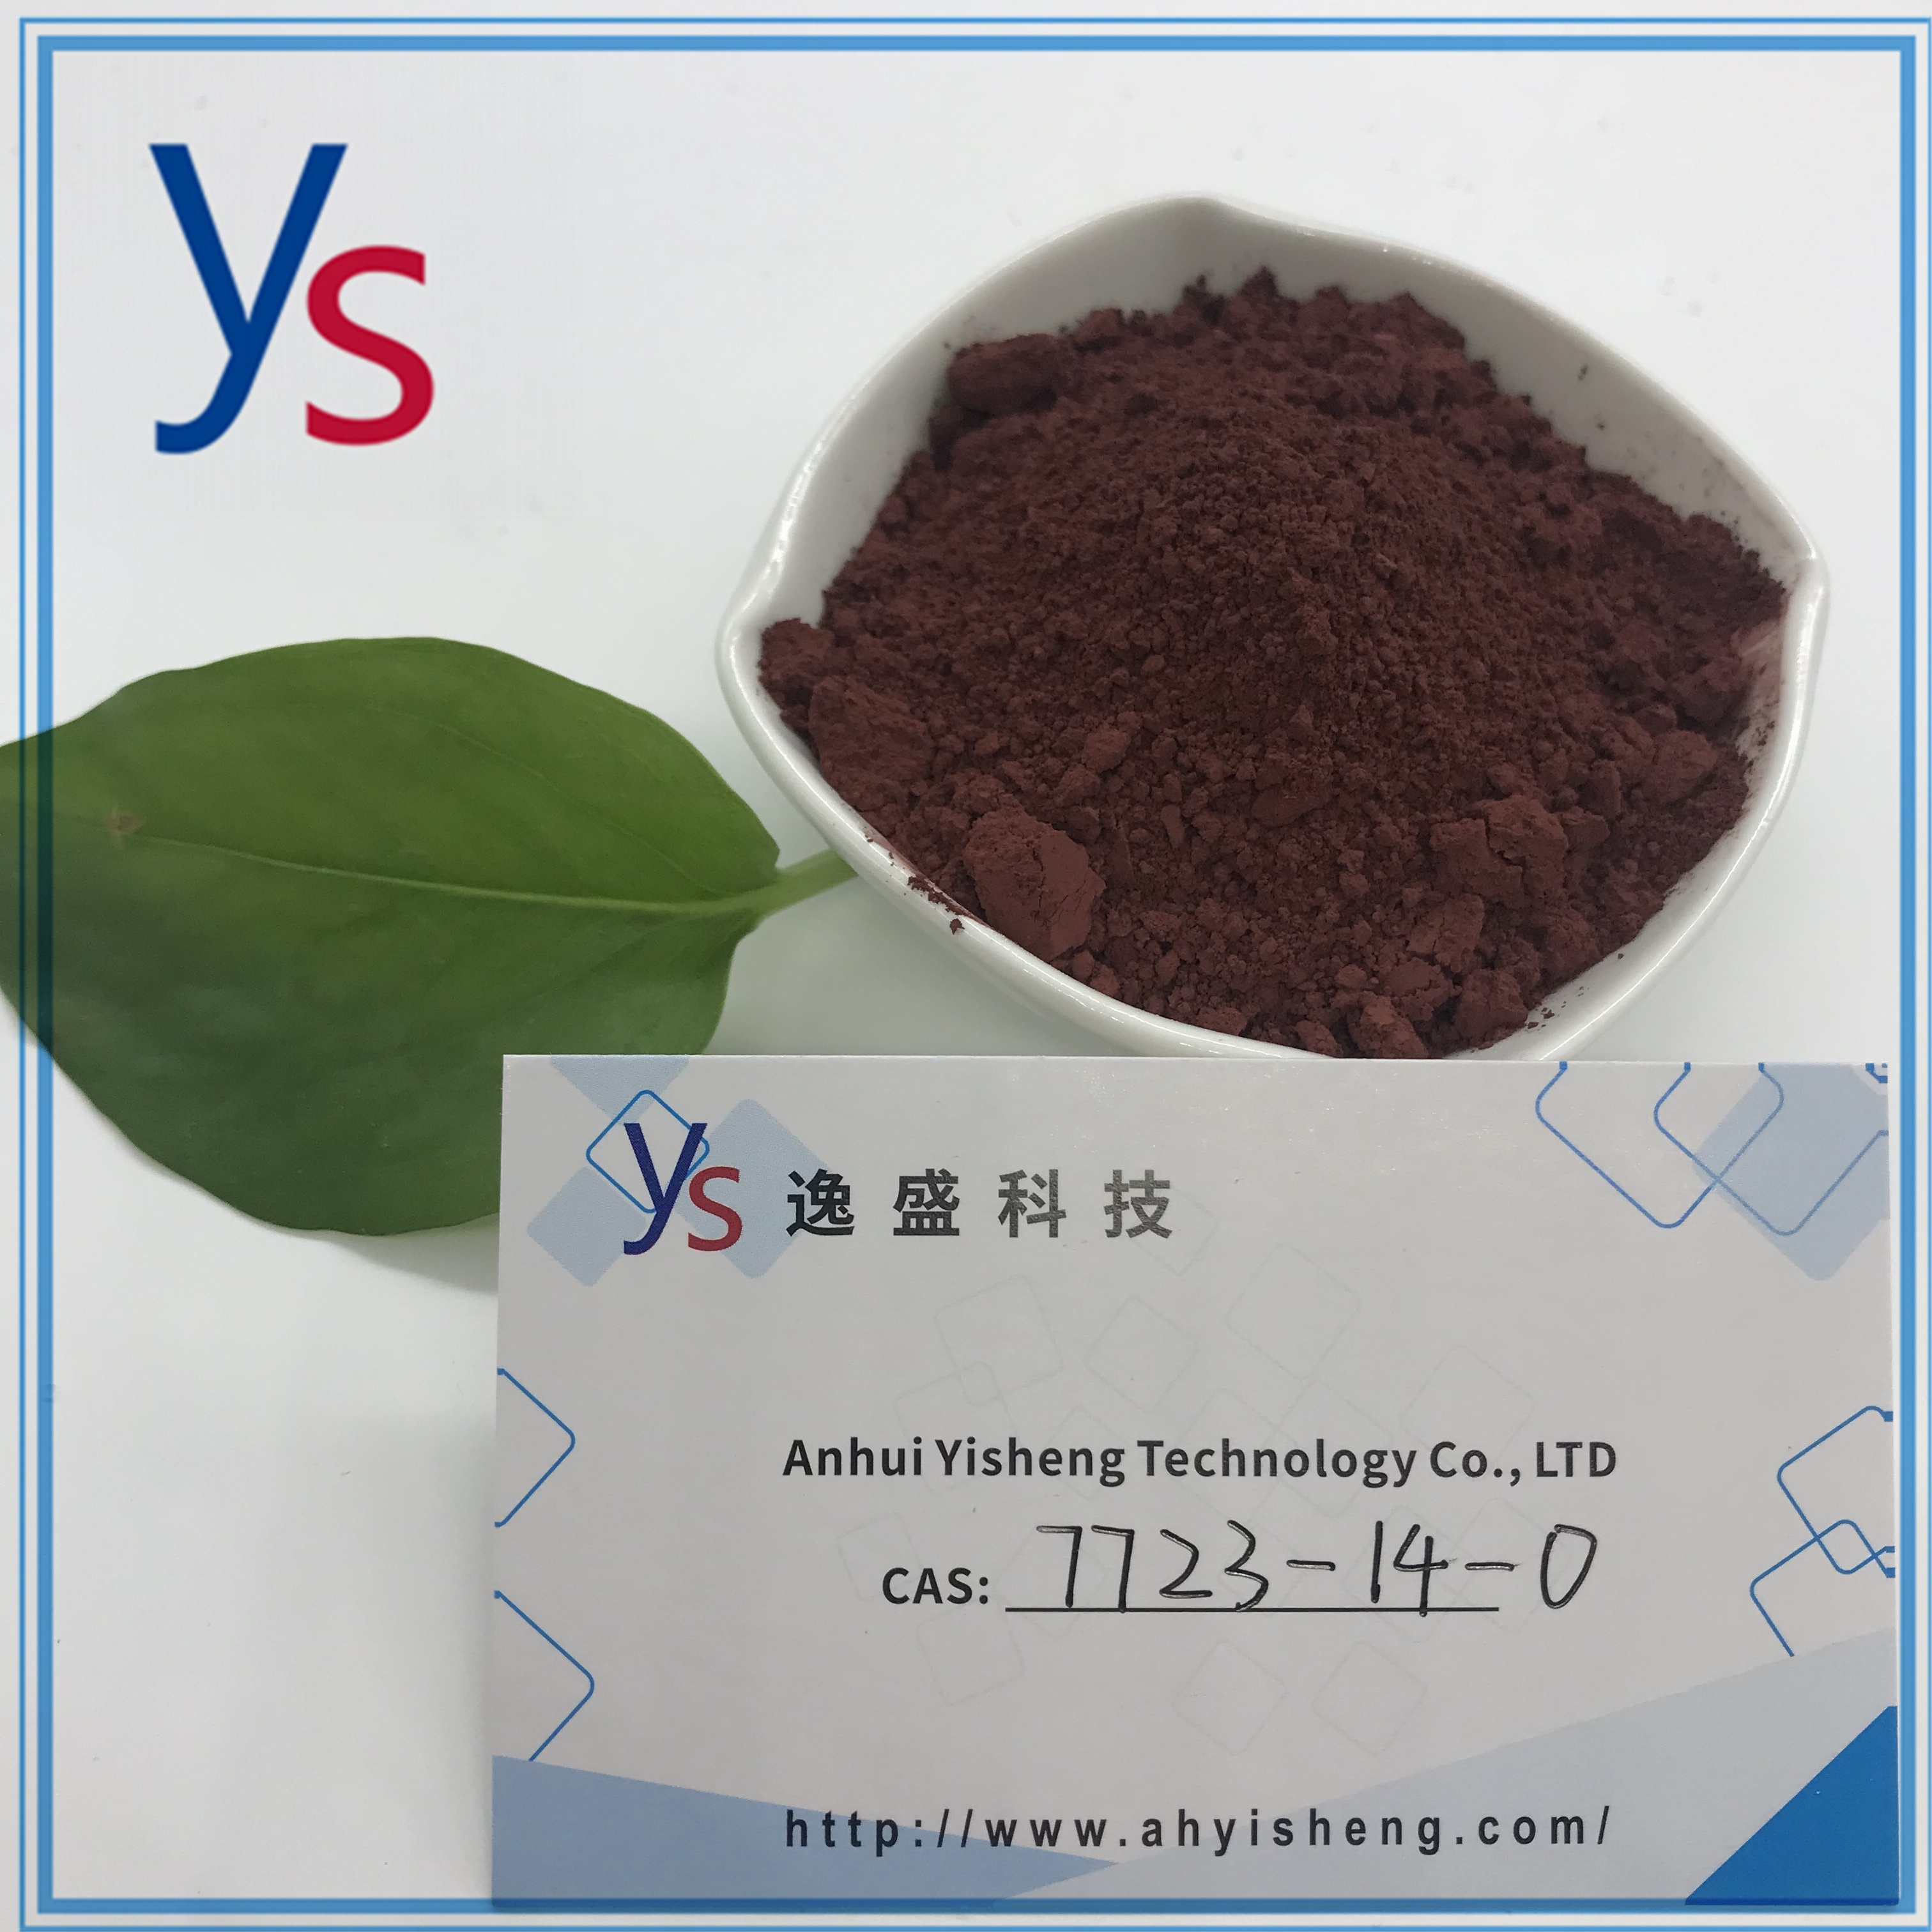 CAS NO.7723-14-0 In Stock New Product Provide Sample 